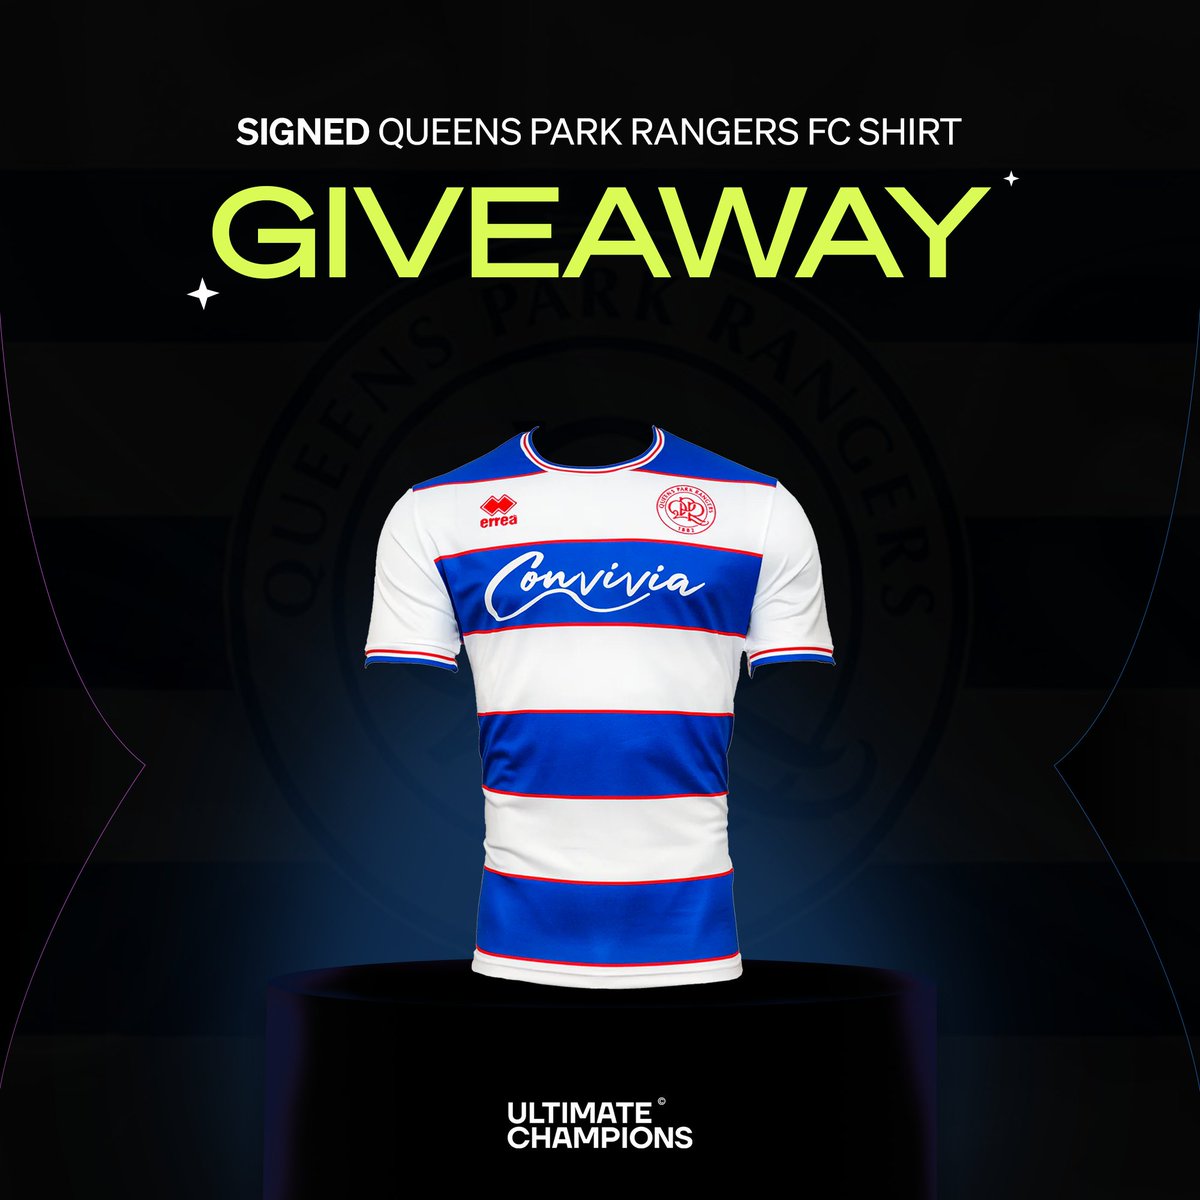 🚨 QPR Giveaway Alert! 🚨 🏆 With another season secured in the Championship, we are putting a @QPR Signed Shirt up for grabs! Follow these steps to enter the giveaway: 1⃣ Like 2⃣ RT 3⃣ Follow @UltiChampsBball & @UltiChampsBball 4⃣ Tag two friends & comment your prediction…